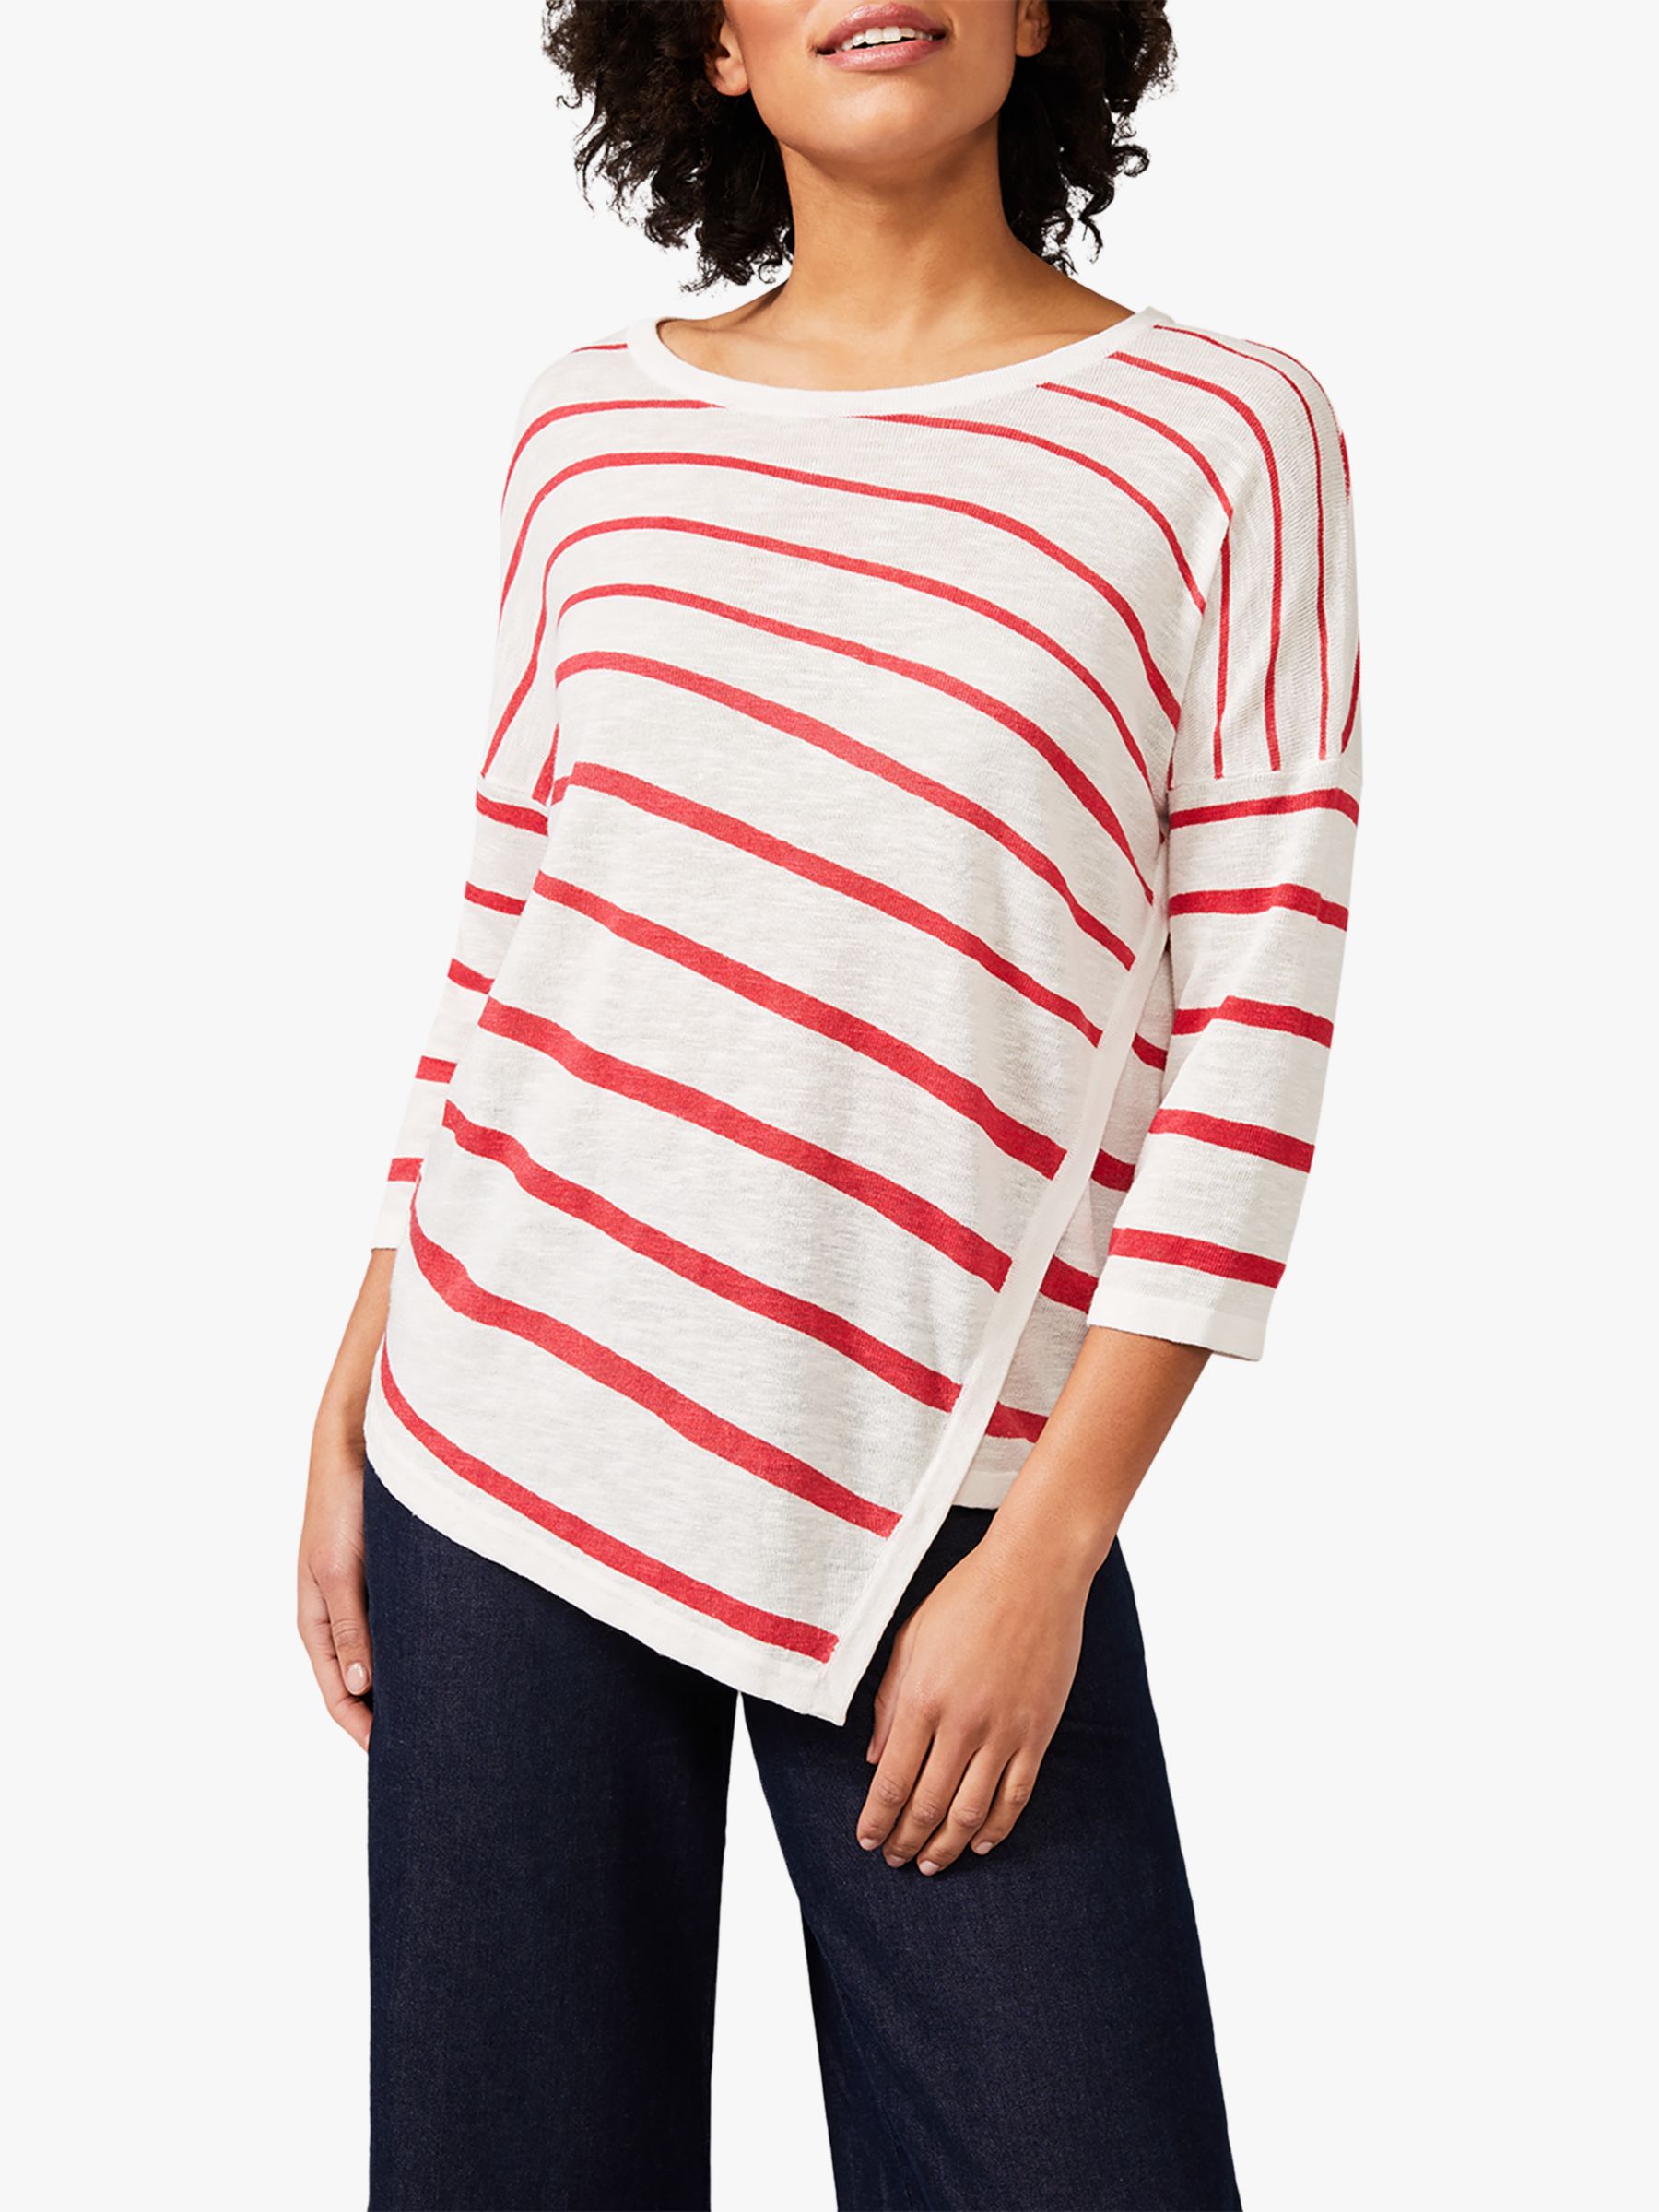 Phase Eight Chika Stripe Knit Top, Raspberry Pink 12 female 50% linen, viscose knitted